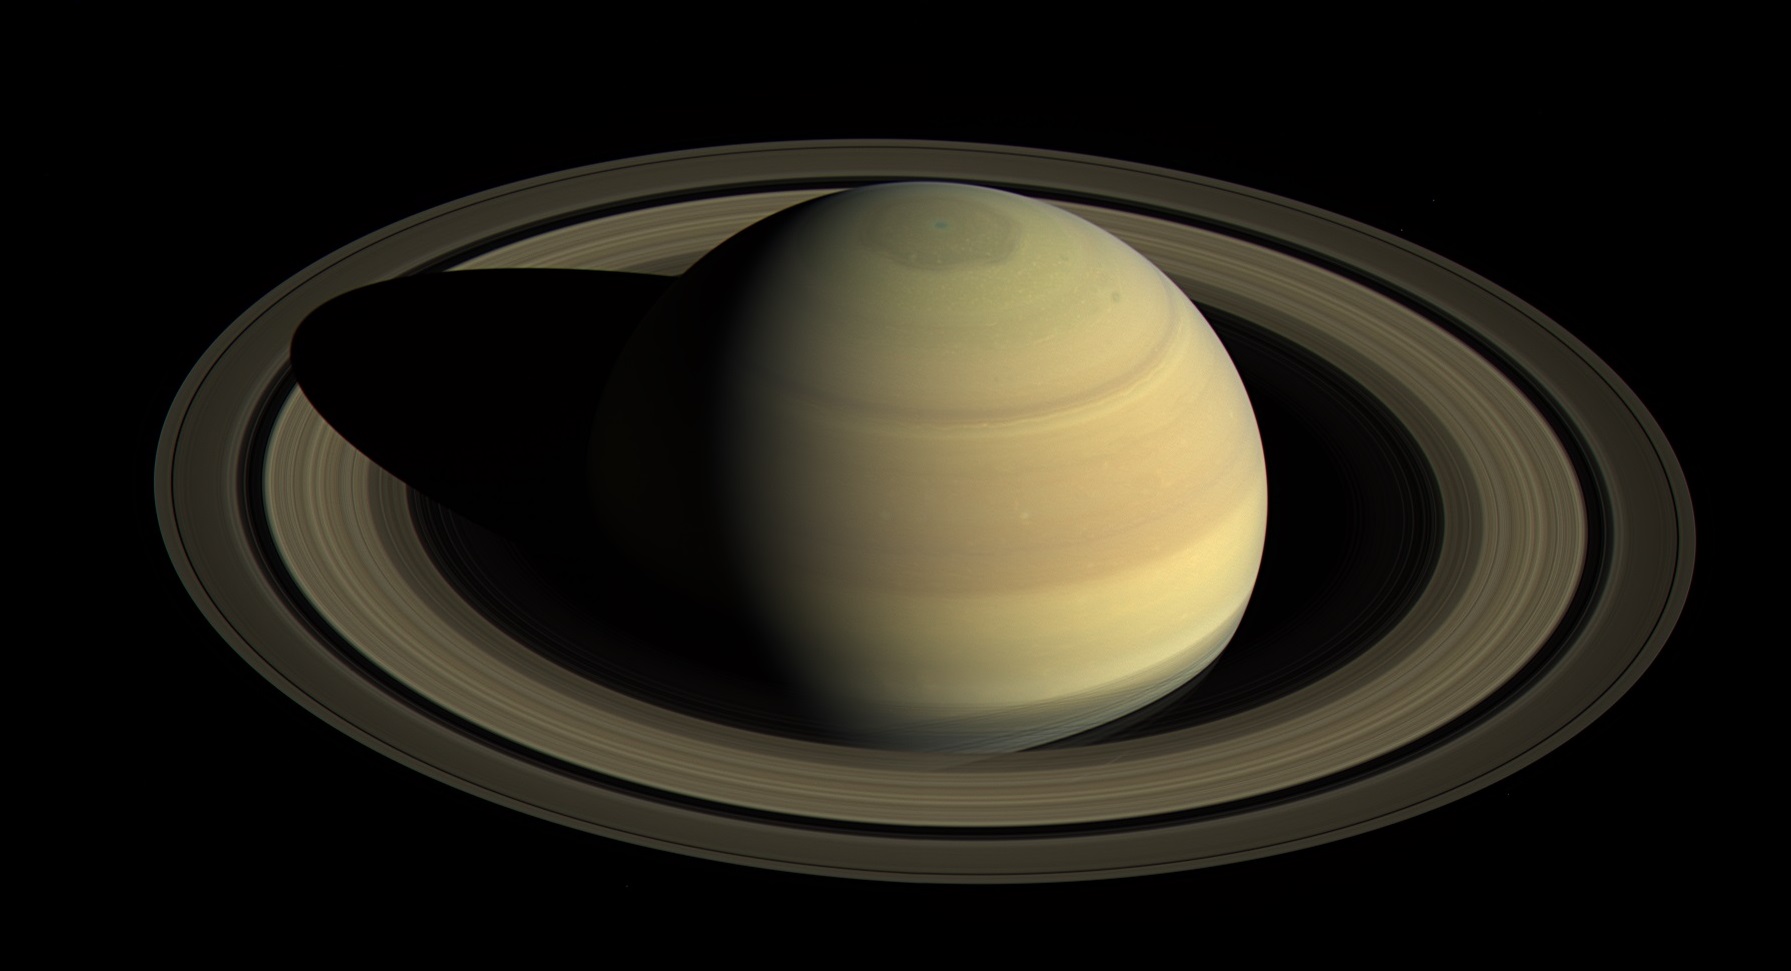 Saturn image is courtesy of NASA/JPL-Caltech/Space Science Institute. 